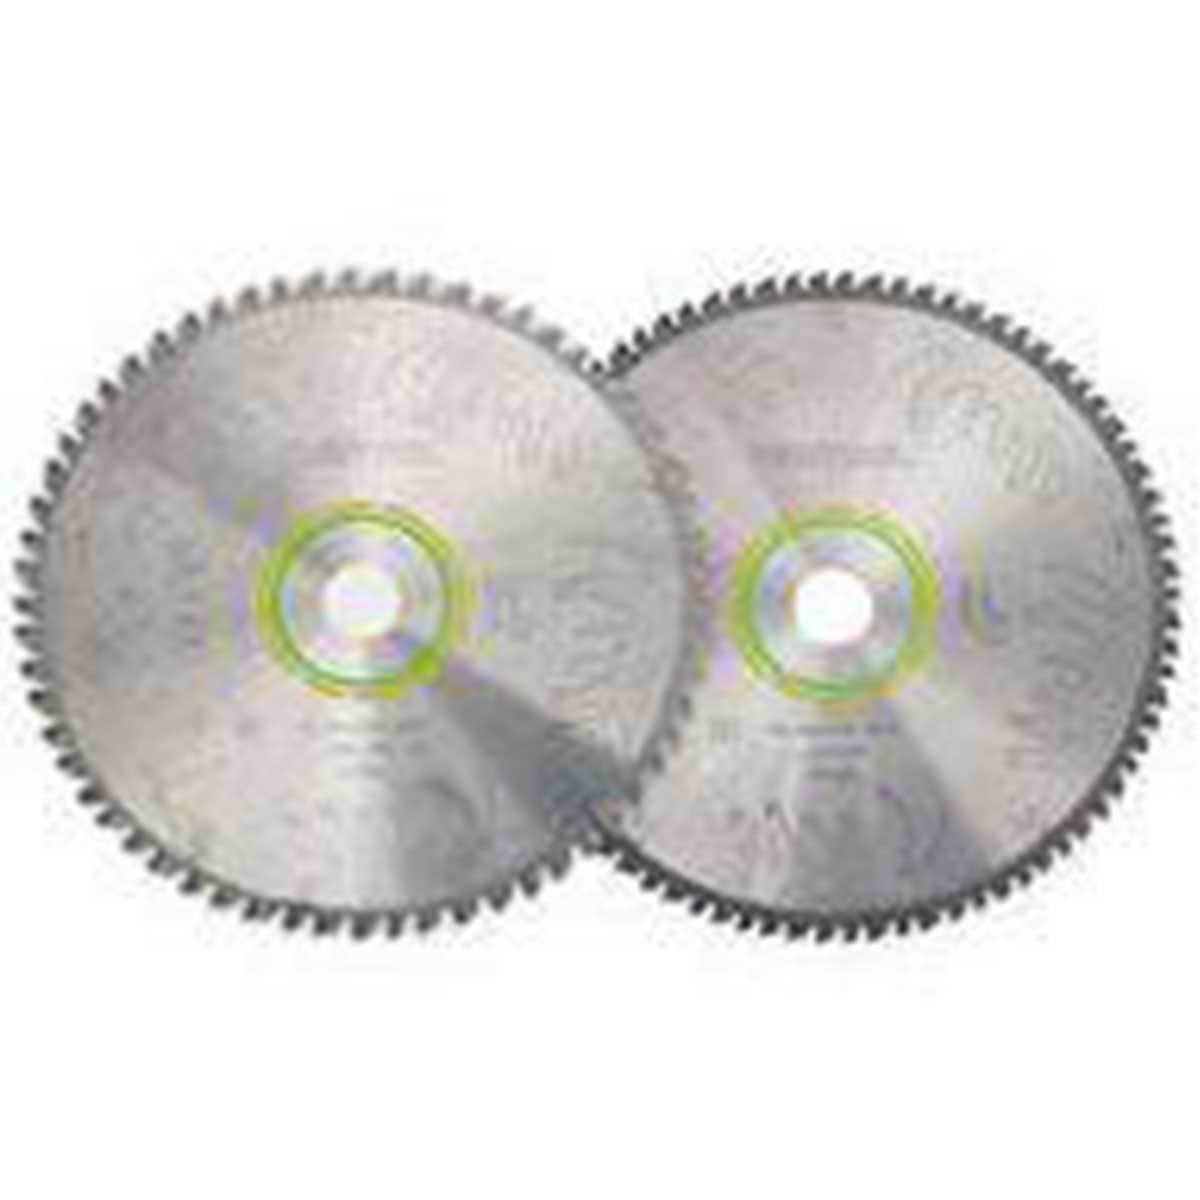 Kapex Saw Blades - For Any Material